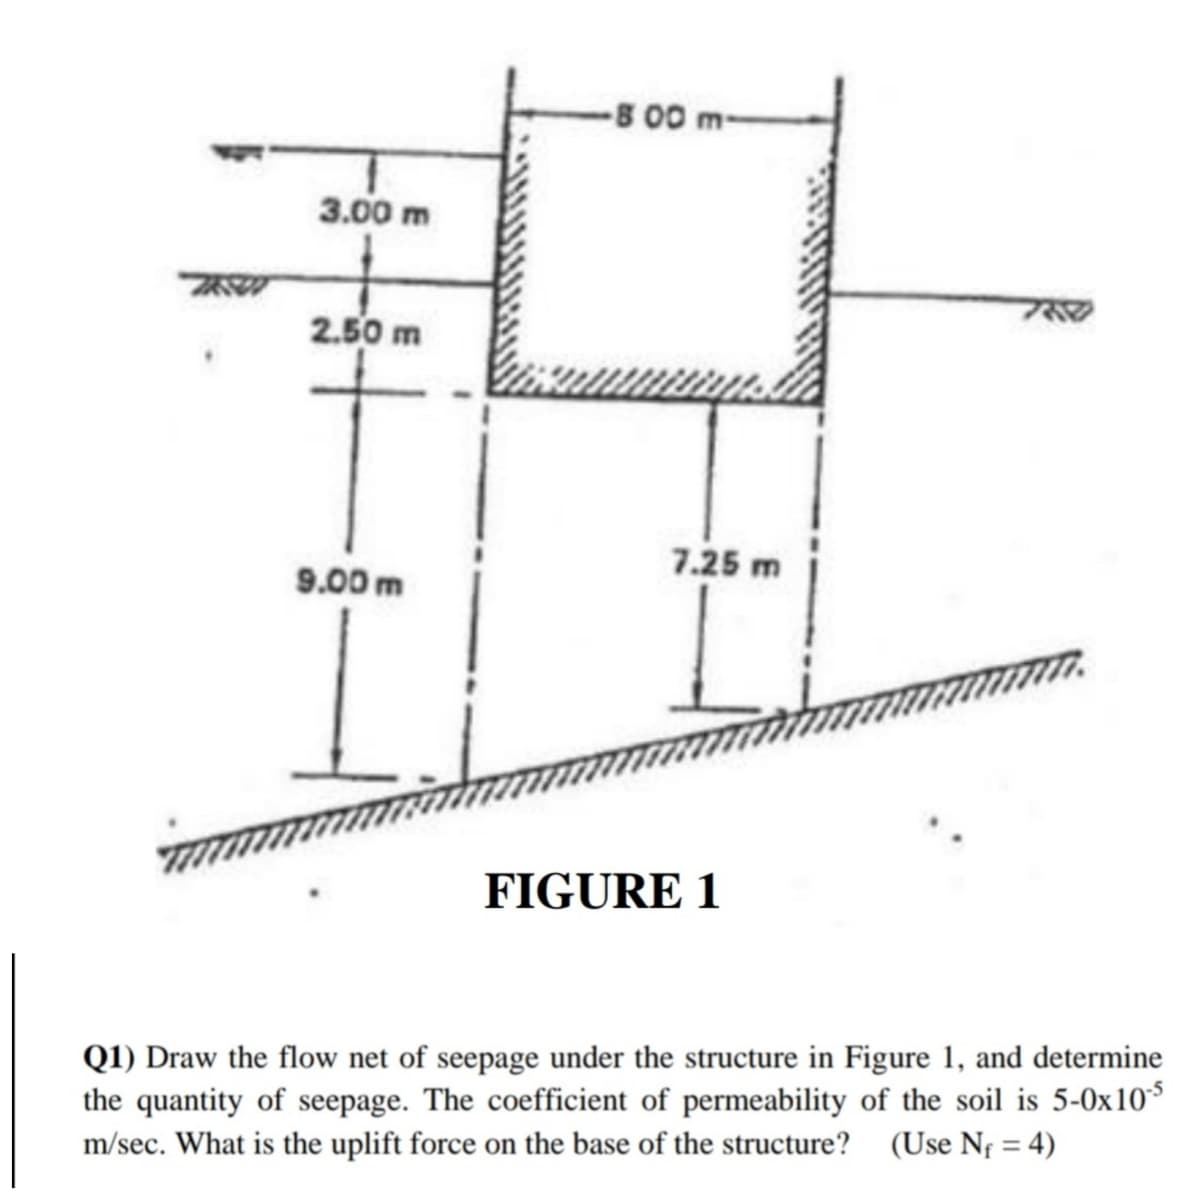 3.00 m
2.50 m
9.00 m
7.25 m
FIGURE 1
Q1) Draw the flow net of seepage under the structure in Figure 1, and determine
the quantity of seepage. The coefficient of permeability of the soil is 5-0x10$
m/sec. What is the uplift force on the base of the structure? (Use Nf = 4)
%3D
